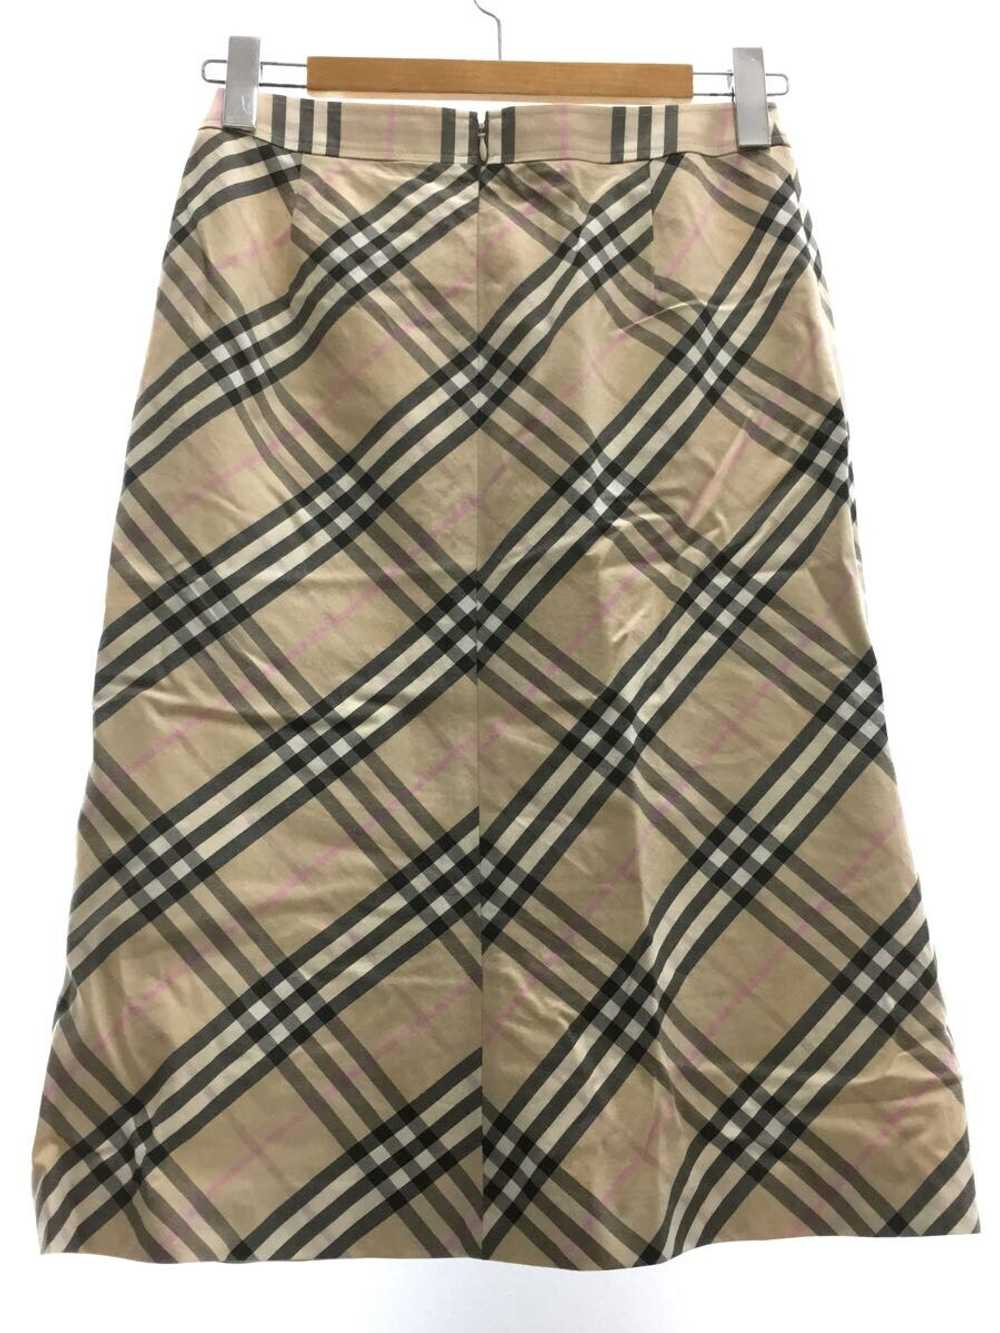 Used Burberry London Skirt/38/Cotton/Beige/Check/… - image 2